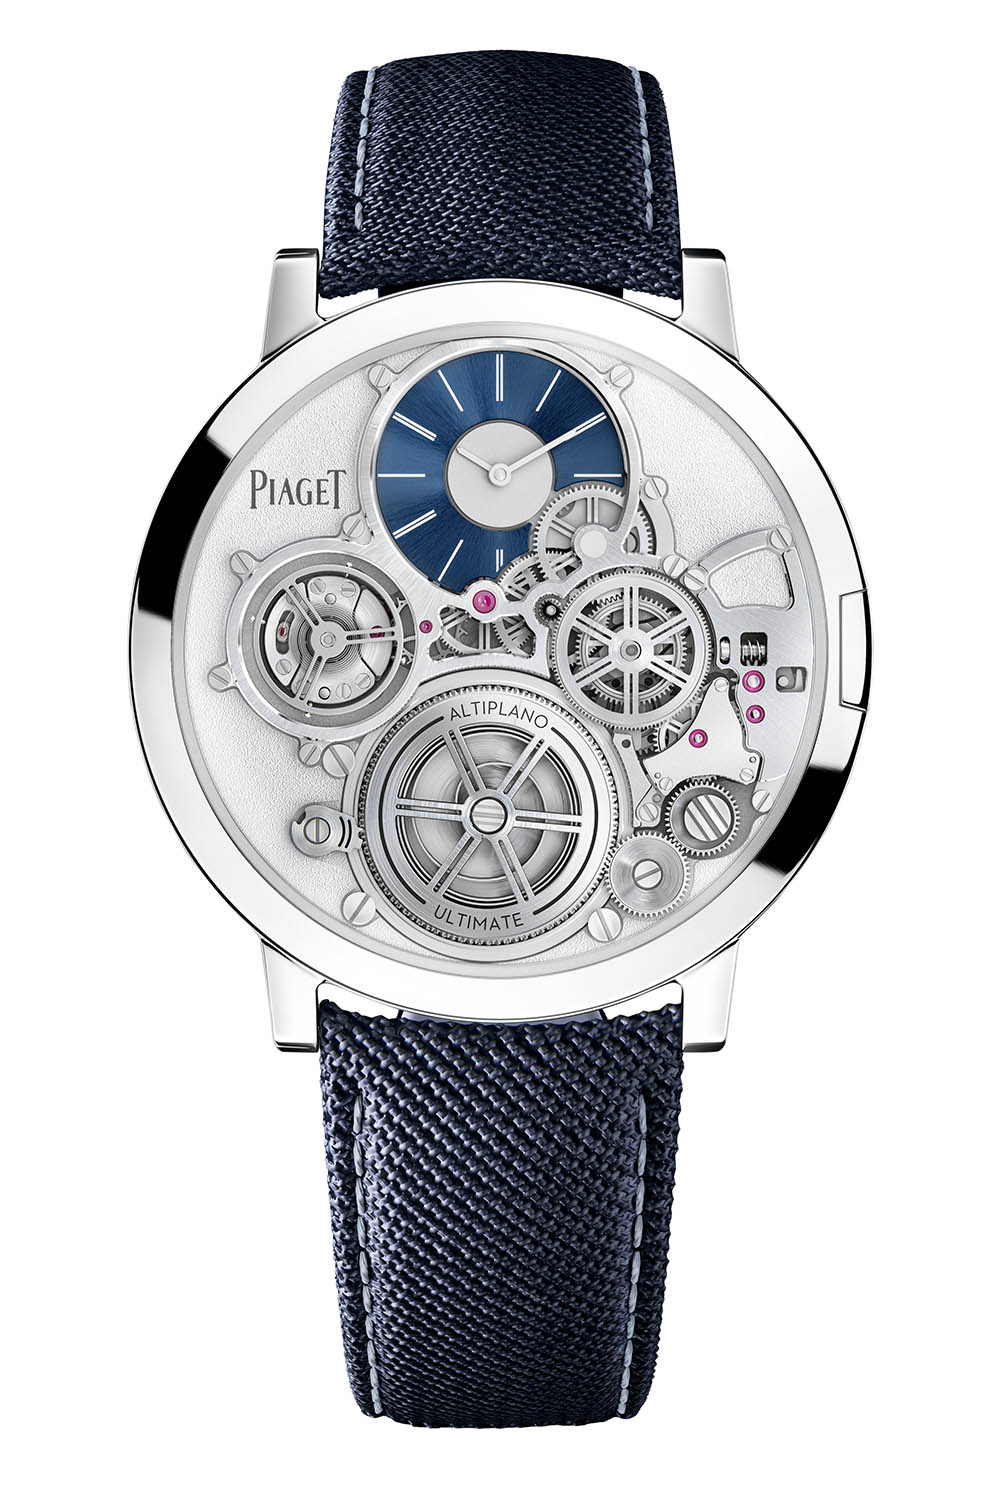 Piaget Altiplano Ultimate Concept 2020 - 7